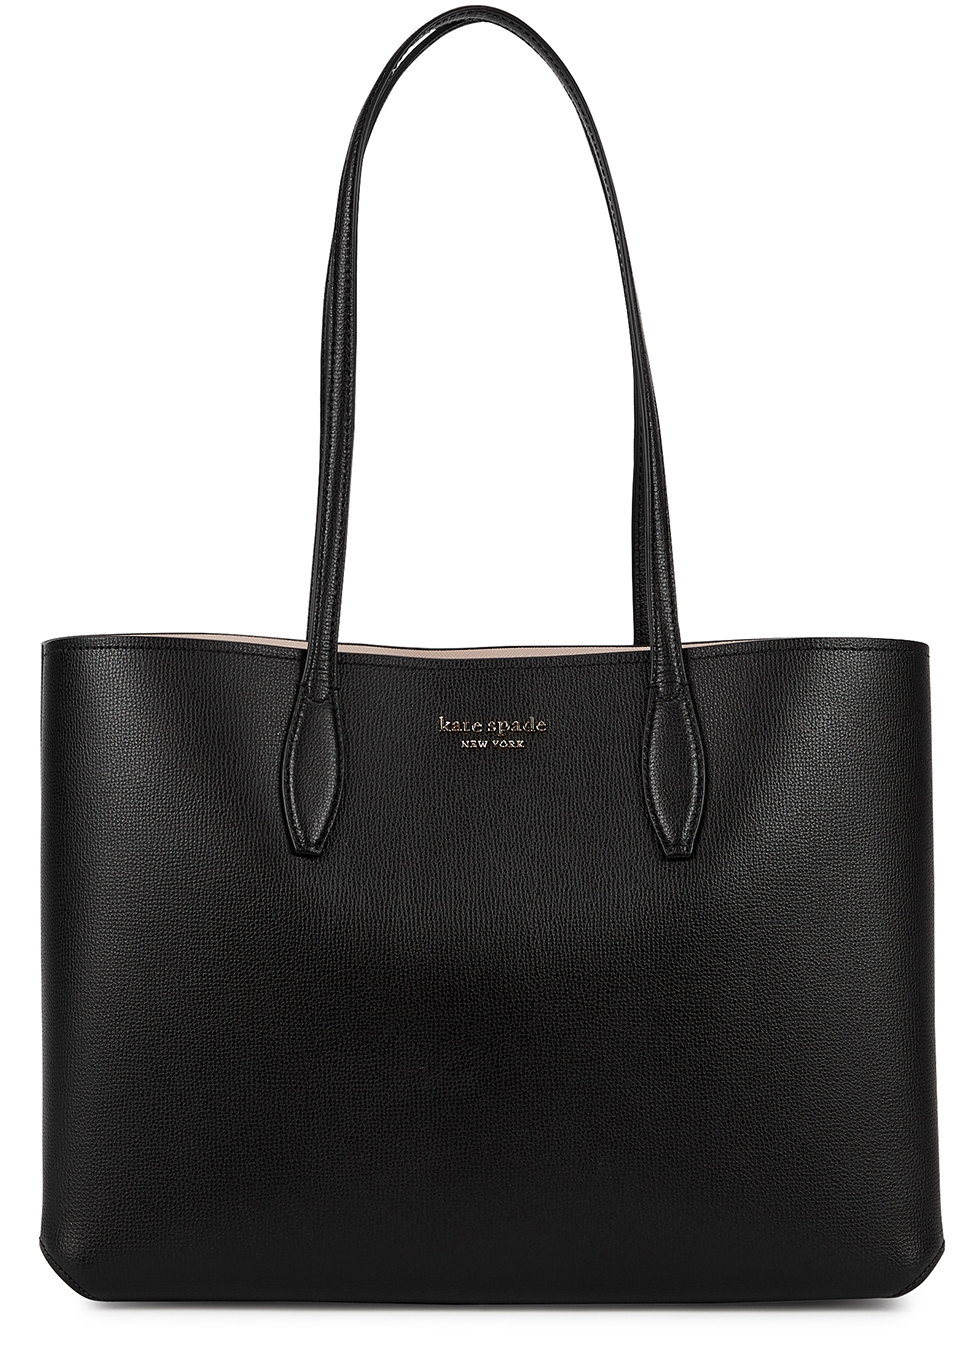 Kate Spade New York All Day large black leather tote - Harvey Nichols